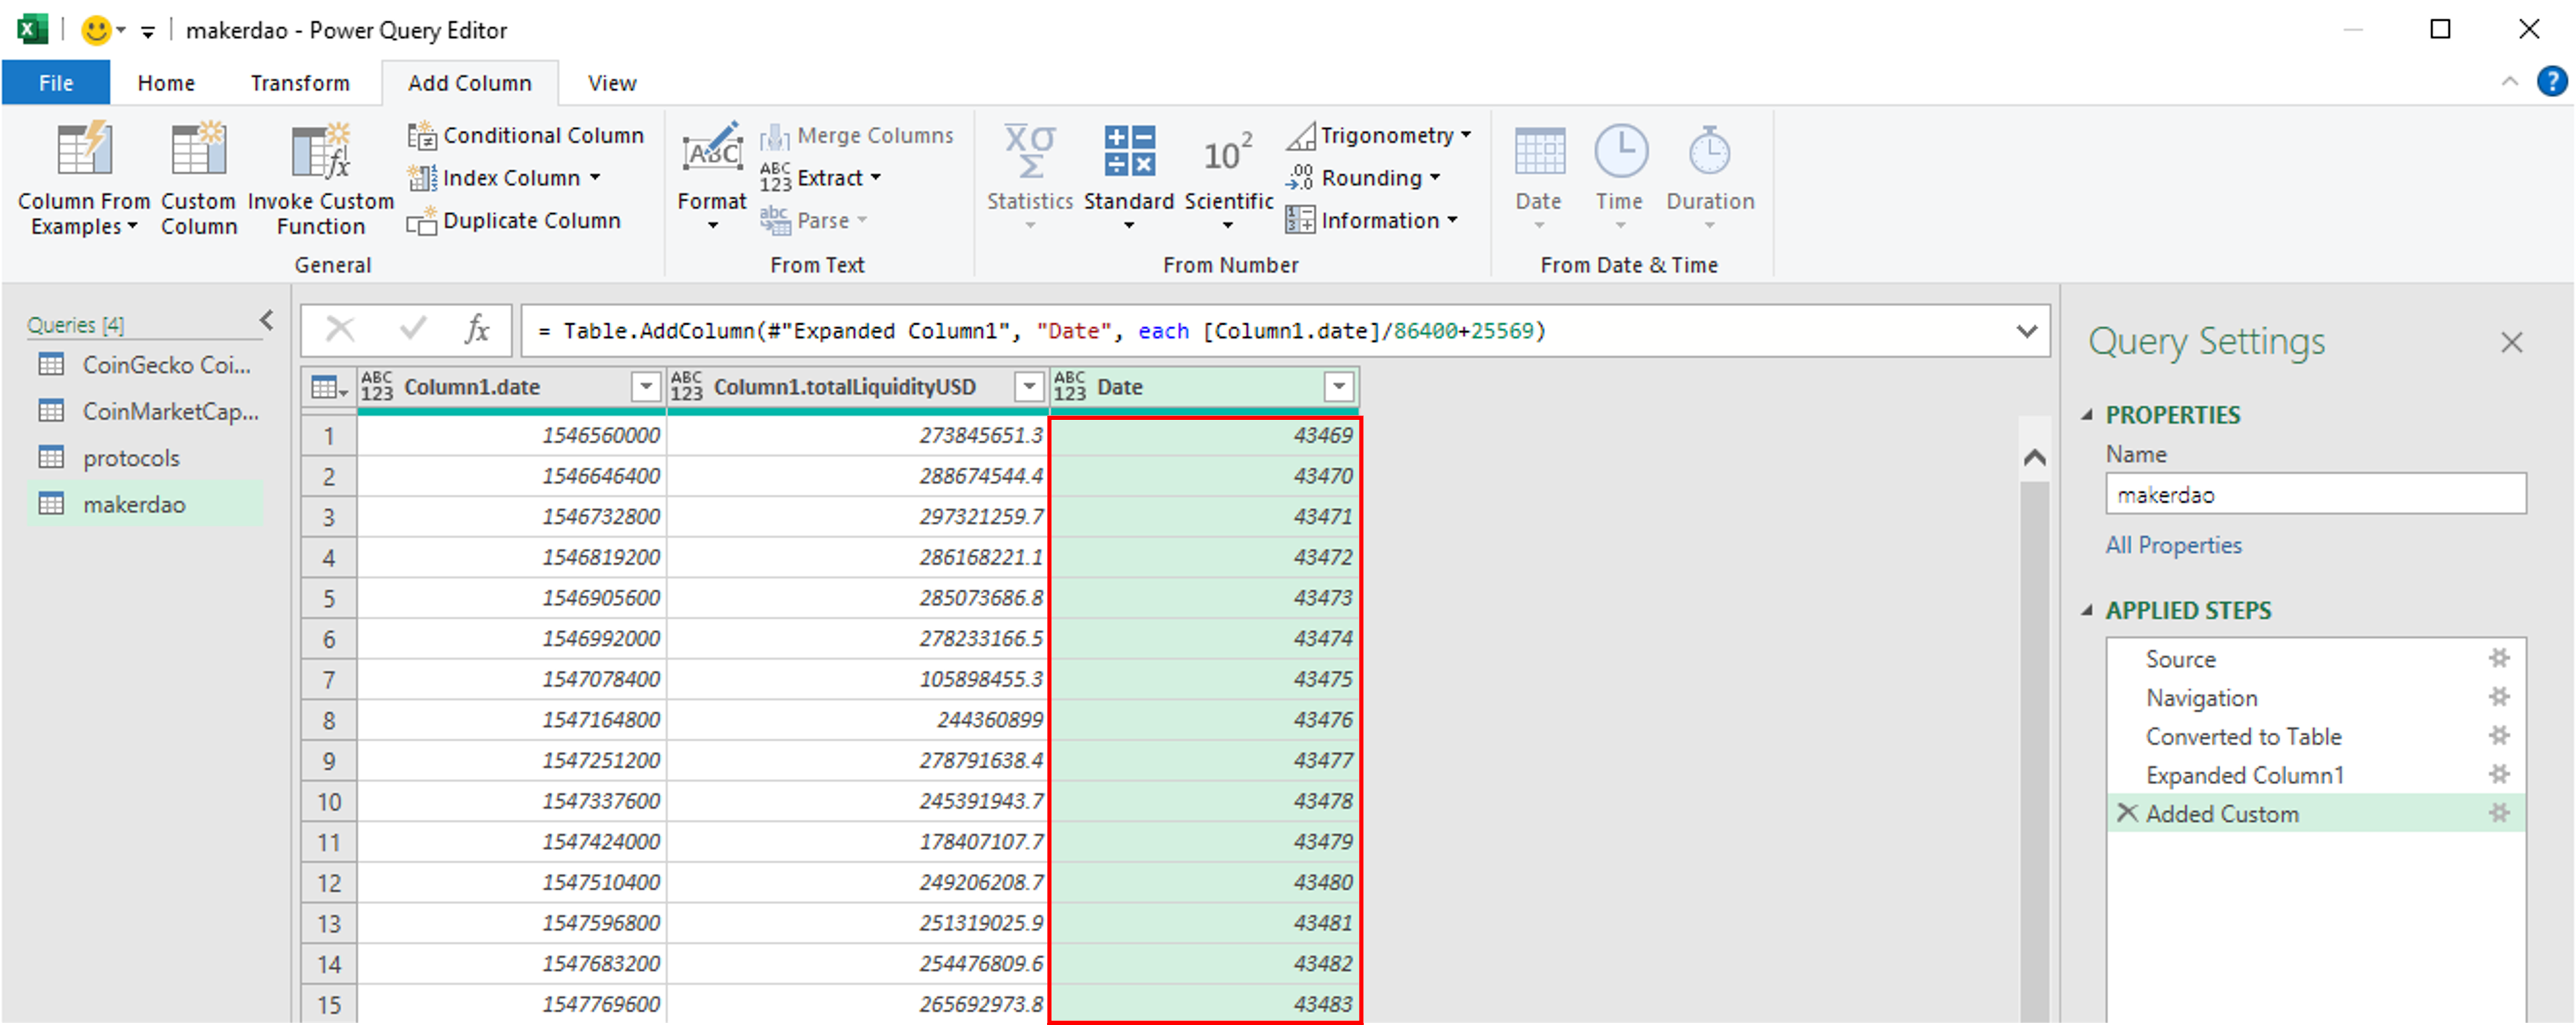 Custom column is added to the Power Query table